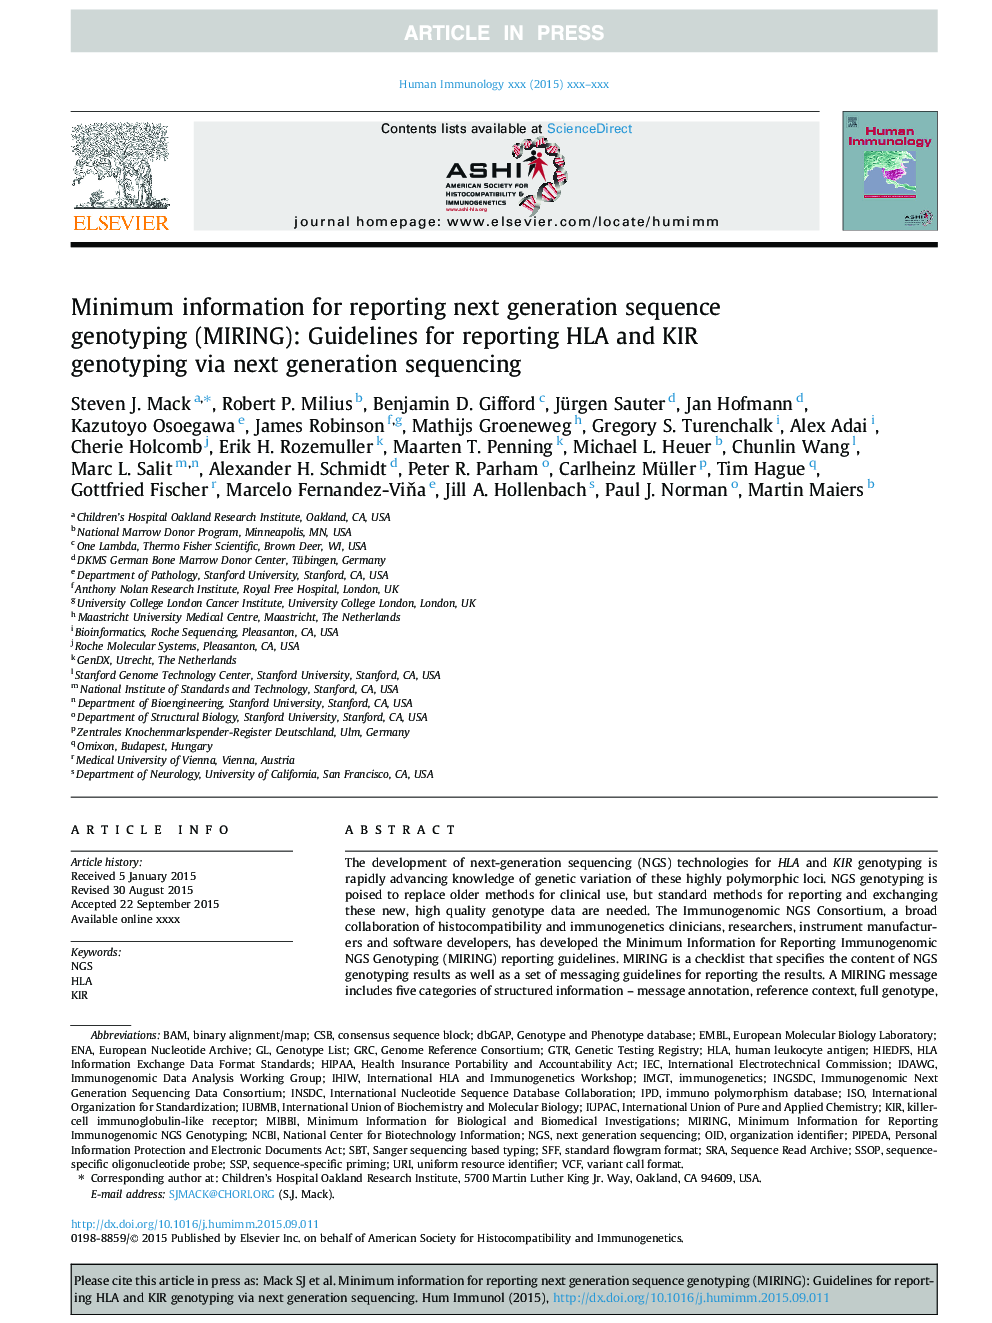 Minimum information for reporting next generation sequence genotyping (MIRING): Guidelines for reporting HLA and KIR genotyping via next generation sequencing